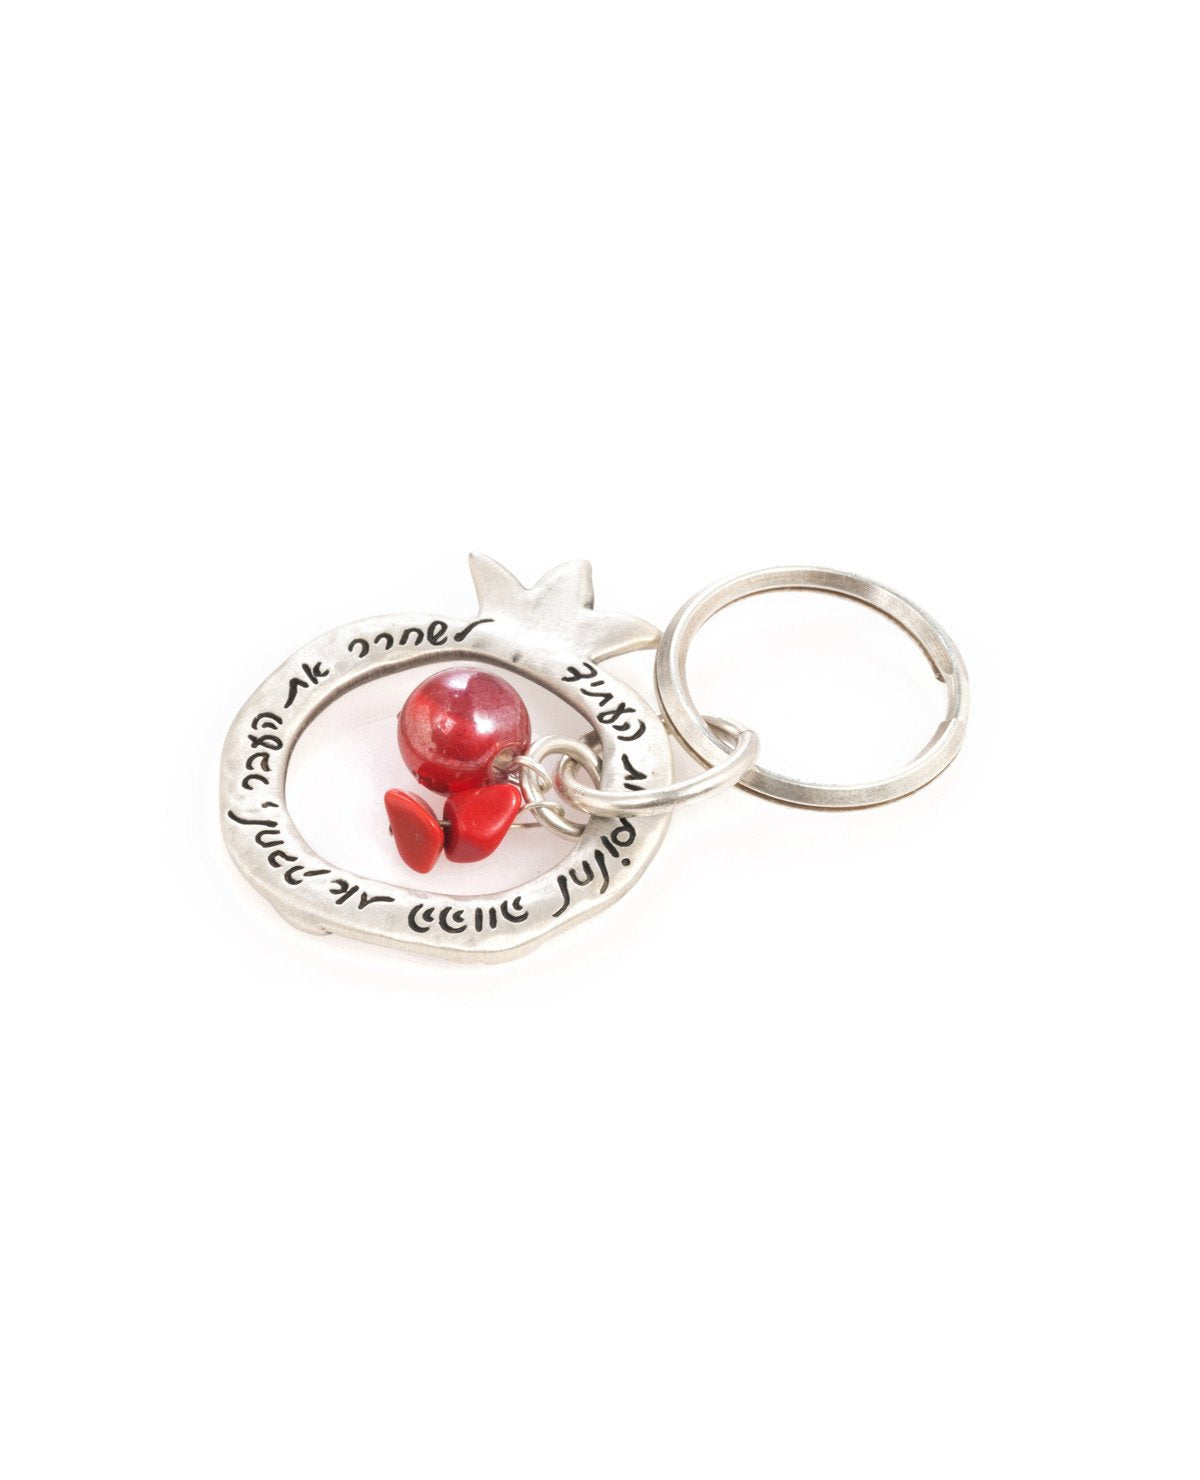 A charming keychain with an important message for life. The keychain is designed as a hollow pomegranate coated in sterling silver. At its center hang a red bead and two beautiful red stones. Written on one side of the pomegranate frame are the words "Let go of the past, embrace the present, dream the future". On the other side of the frame are little pomegranate decorations. The keychain is strong and reliable. A wonderful and exciting gift for him or for her, or for anyone in fact who wants to live life a